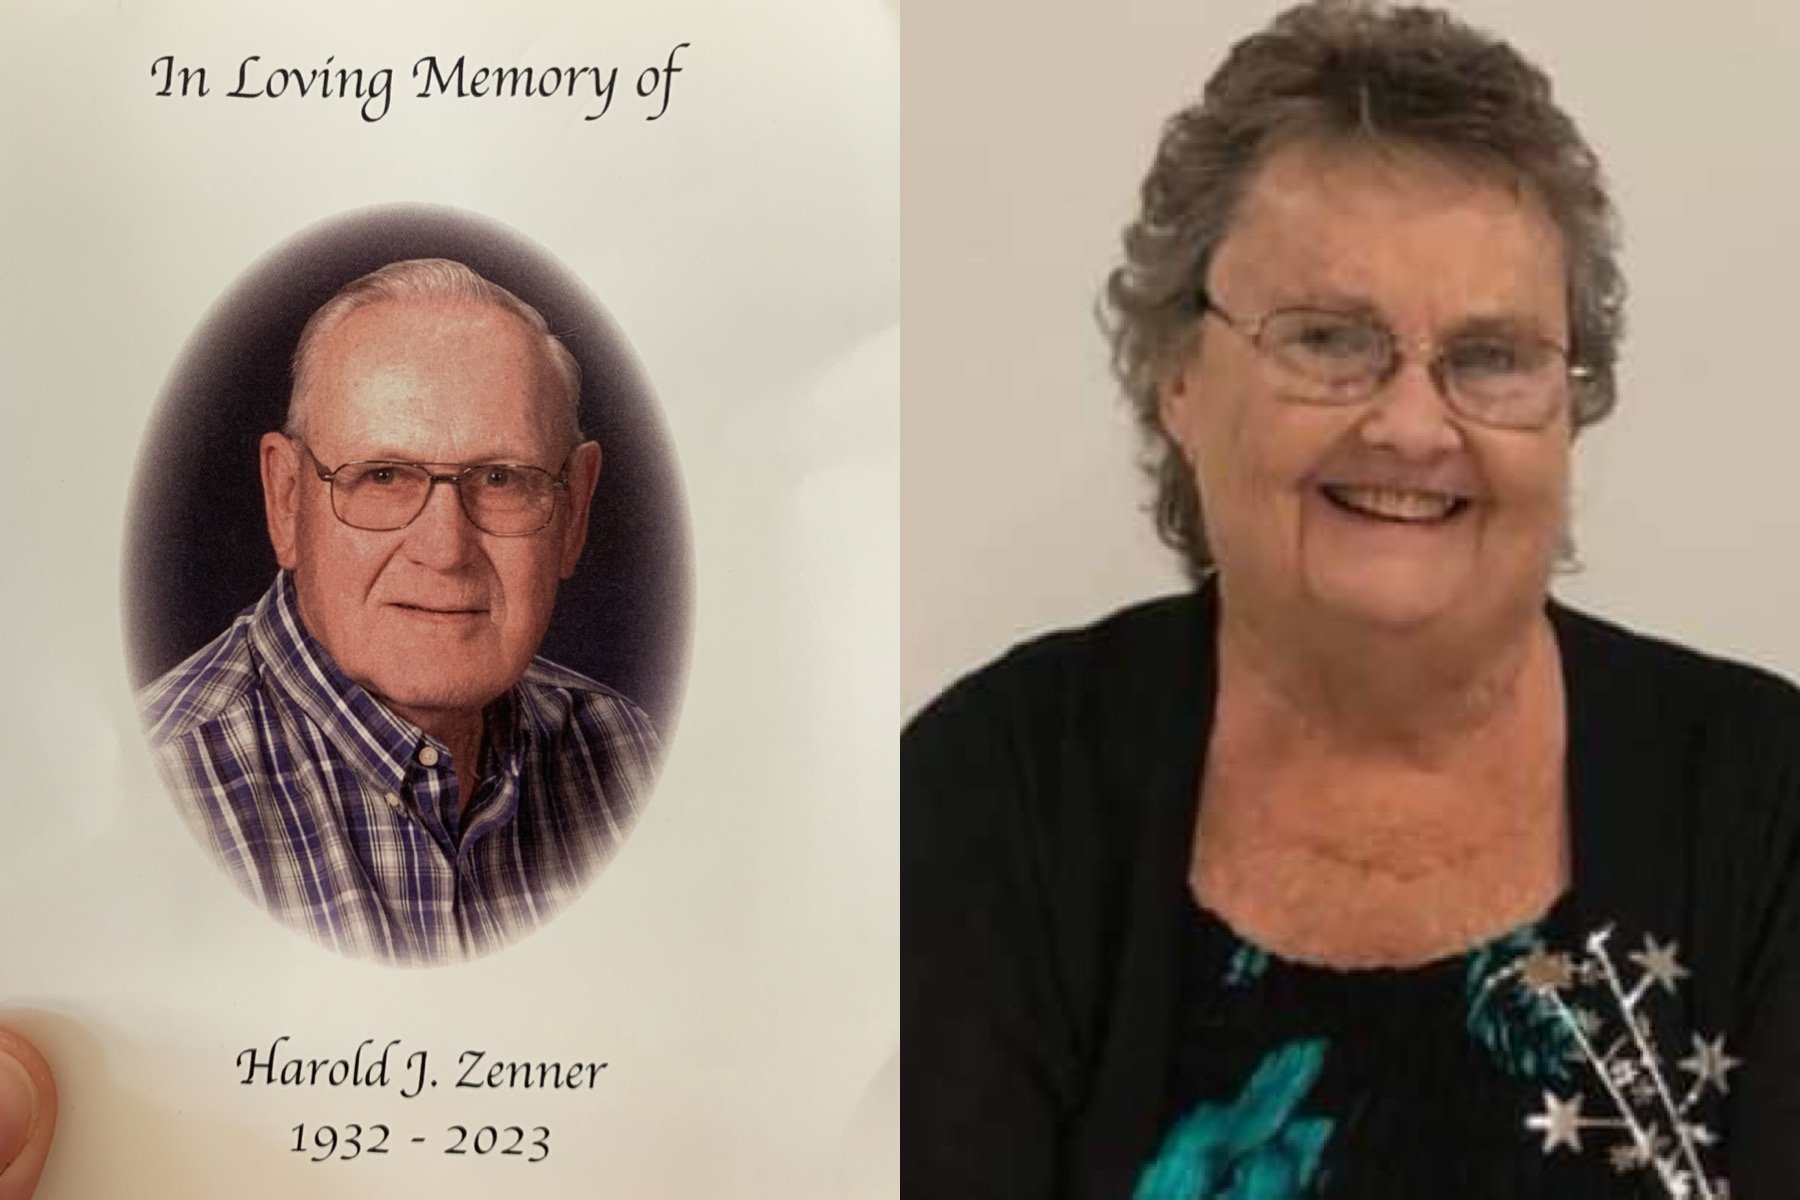  My paternal grandfather, Harold Zenner, and maternal grandmother, Vonda Carlin, passed away this summer. I have been beyond blessed to have all of my grandparents for a majority of my life. Selfishly I don’t want them to go, but it’s inevitable. Wha